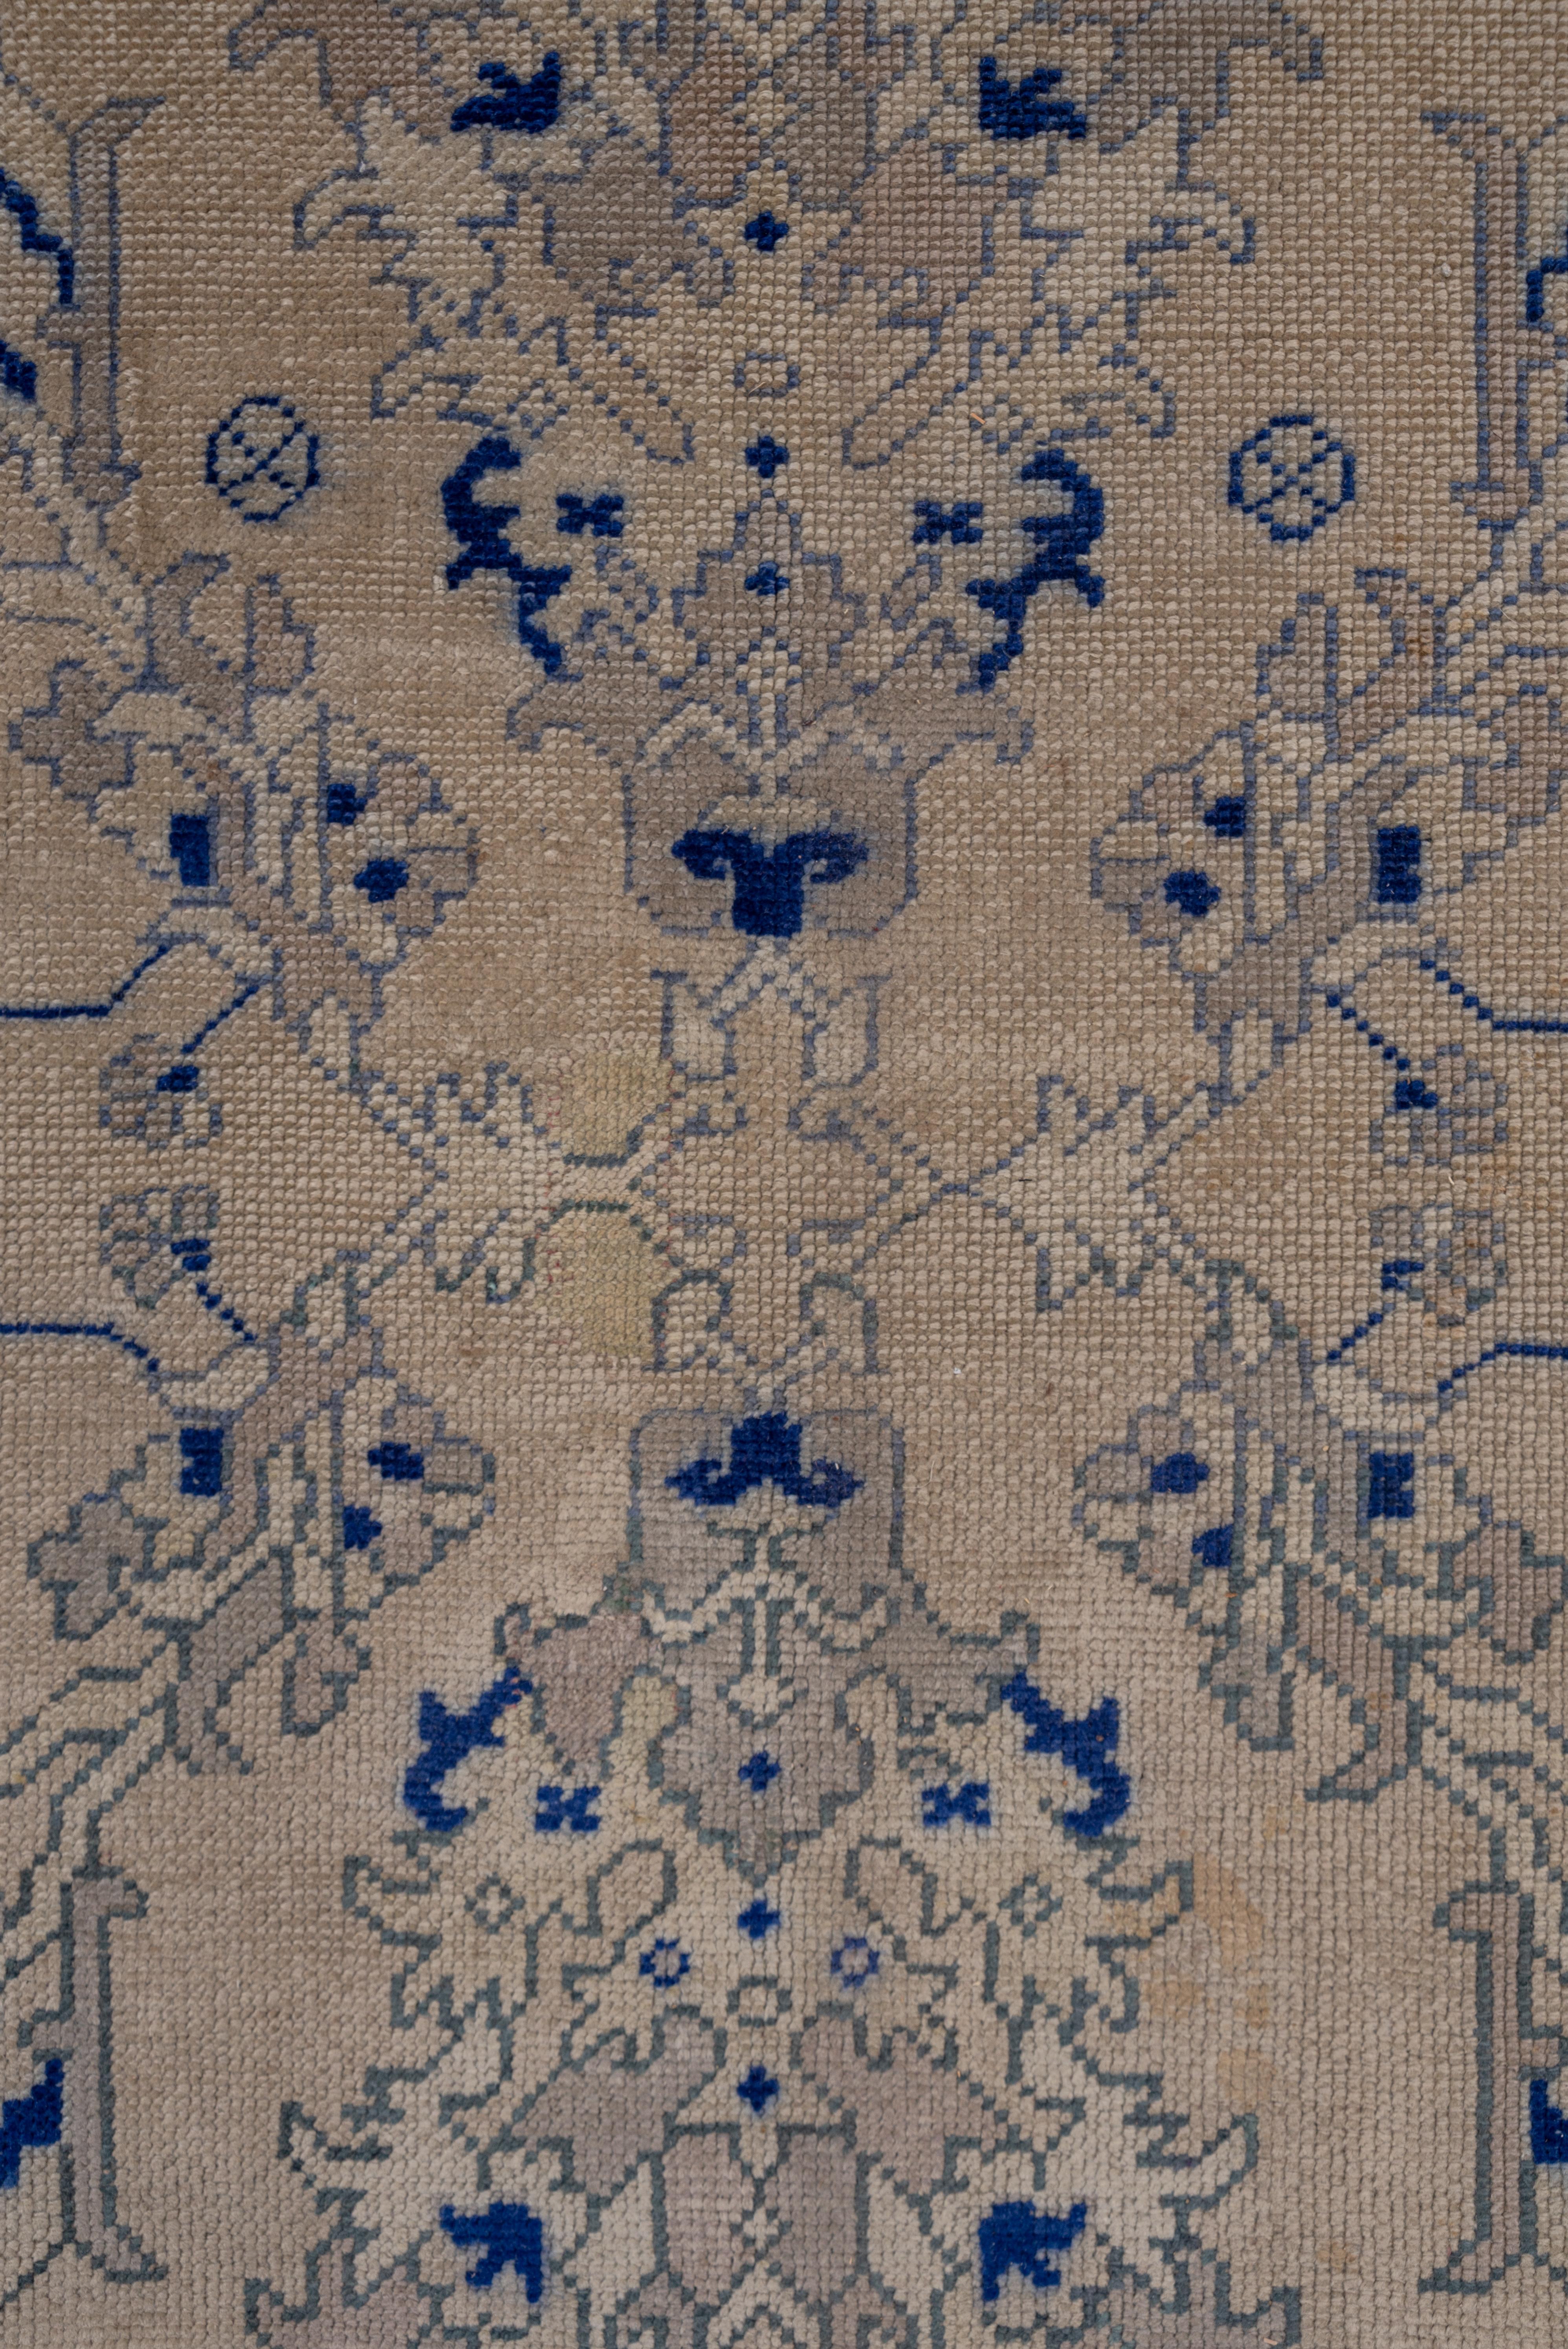 Royal Blue Bordered Antique Oushak Carpet In Excellent Condition For Sale In New York, NY